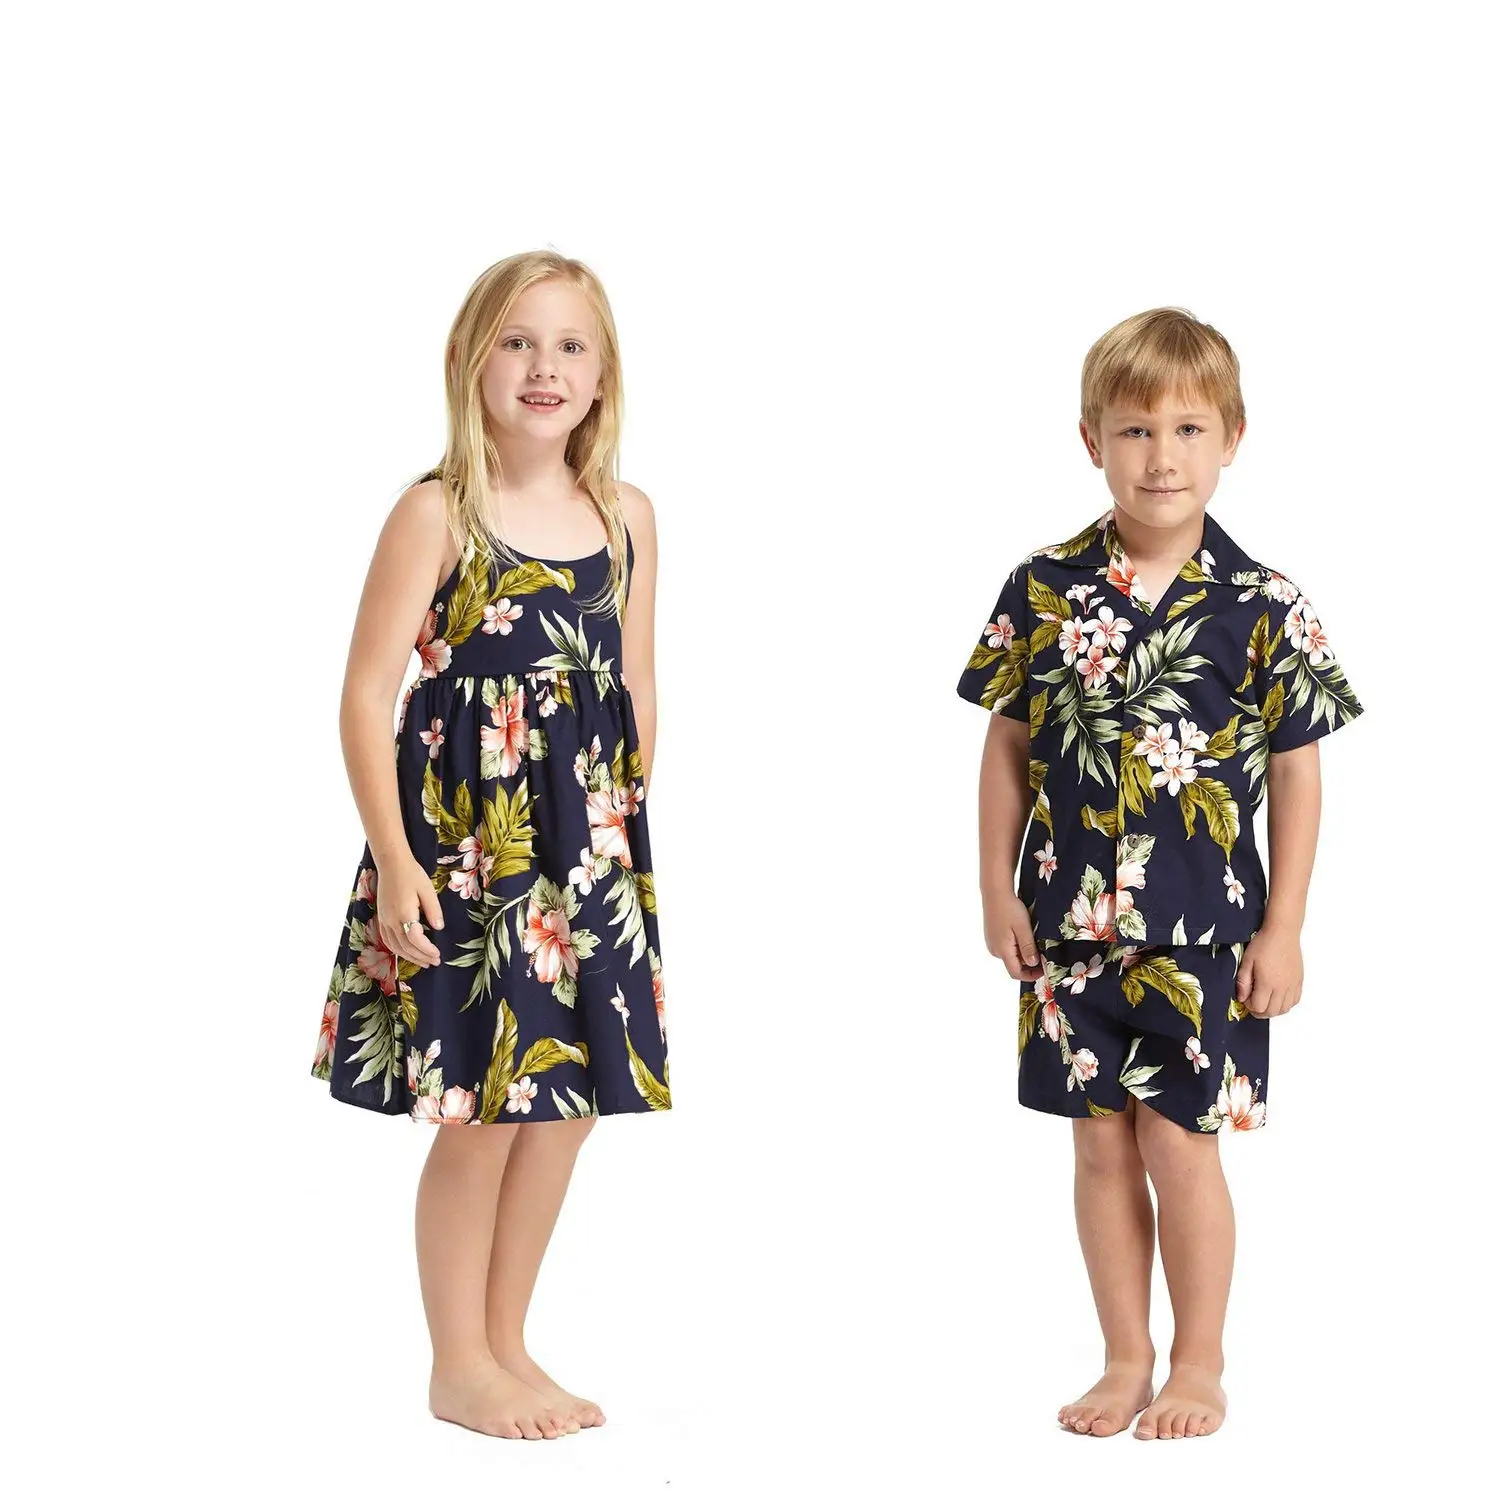 matching dress for boy and girl